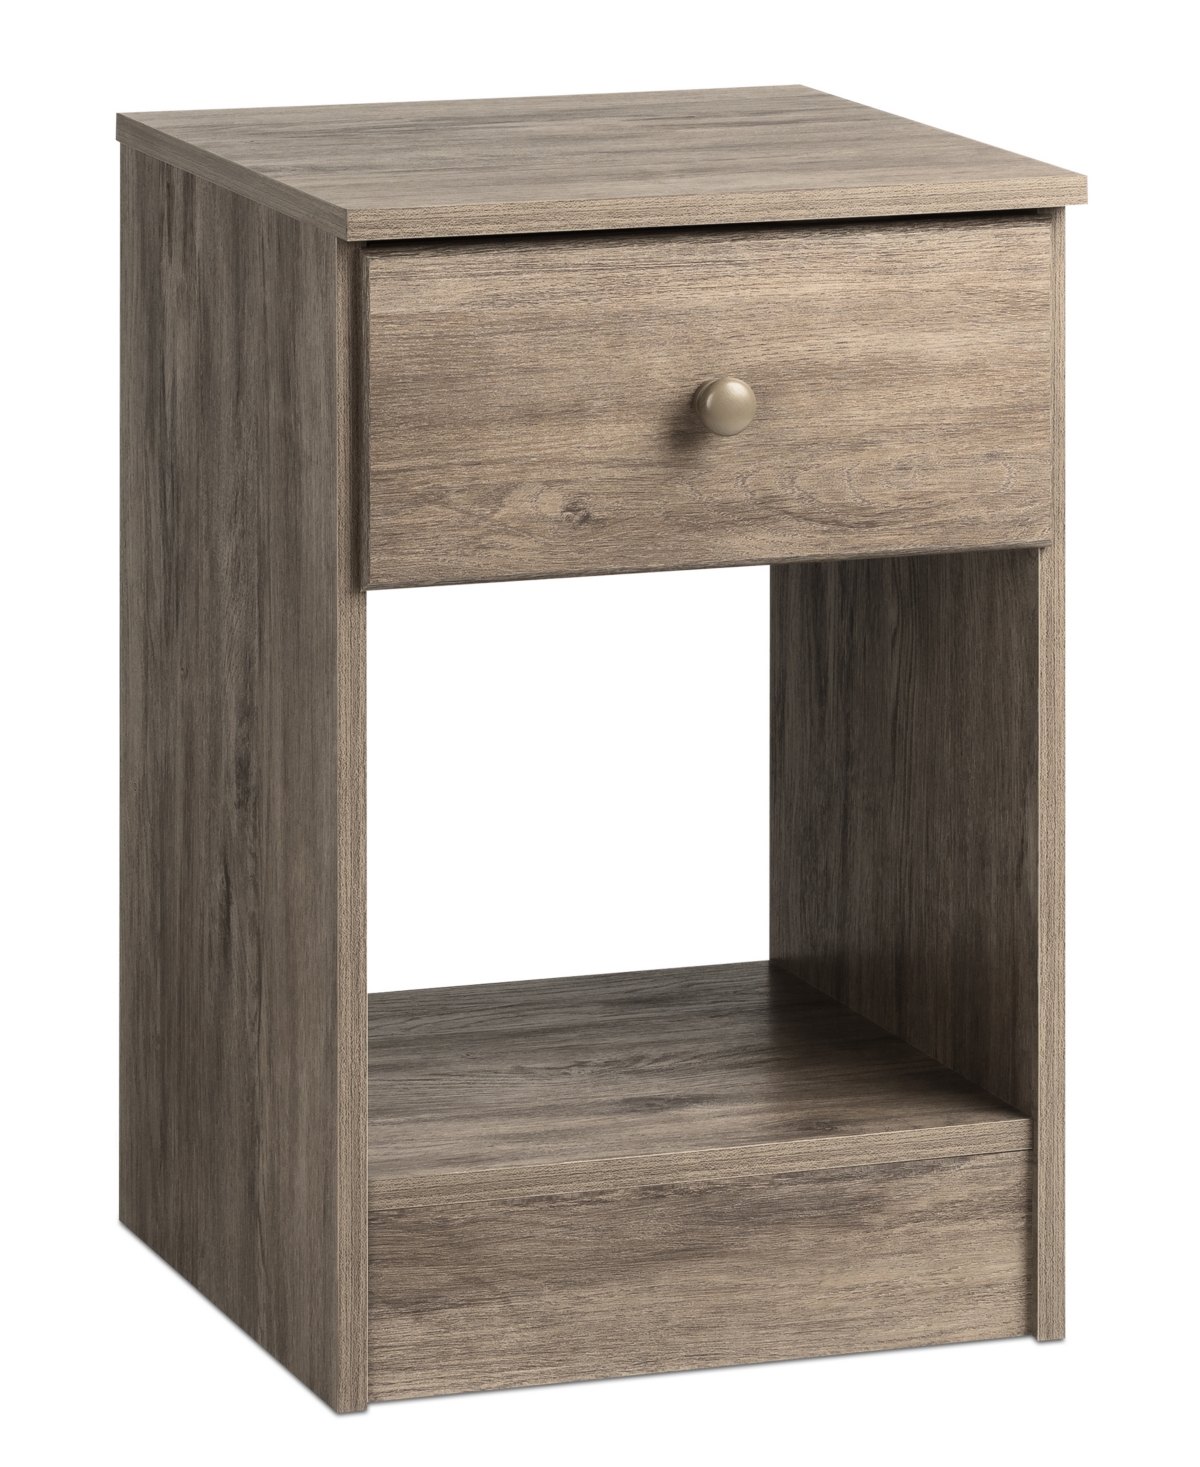 Prepac Astrid Tall 1-drawer Nightstand In Drifted Gray